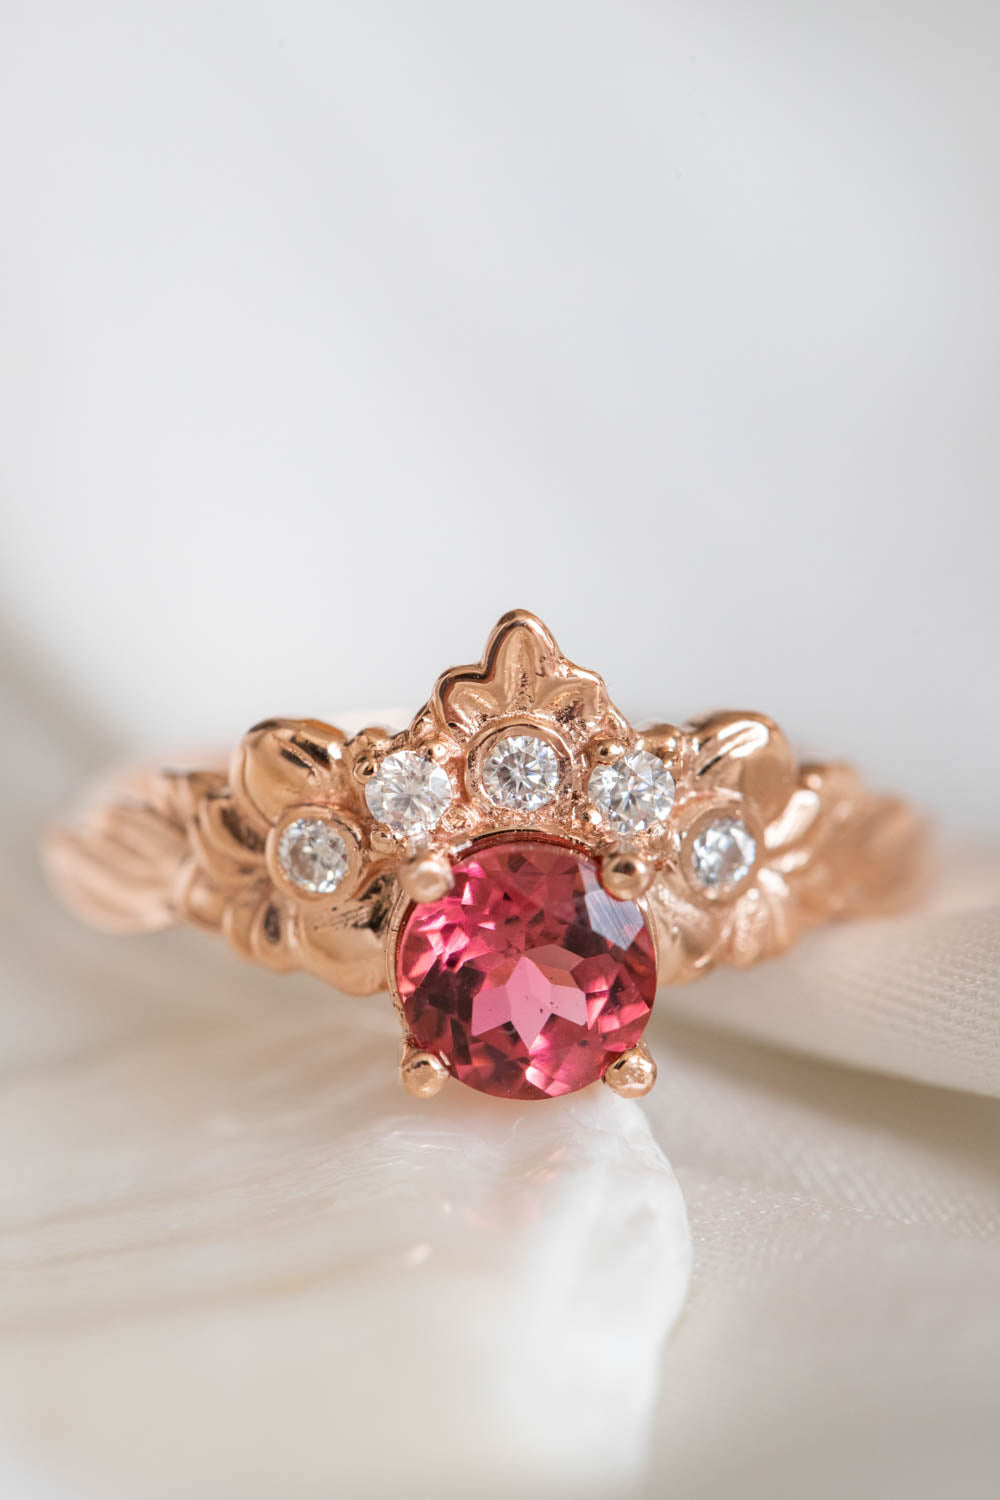 Flower crown engagement ring with pink tourmaline, botanic inspired diamond engagement ring /  Forget Me Not - Eden Garden Jewelry™